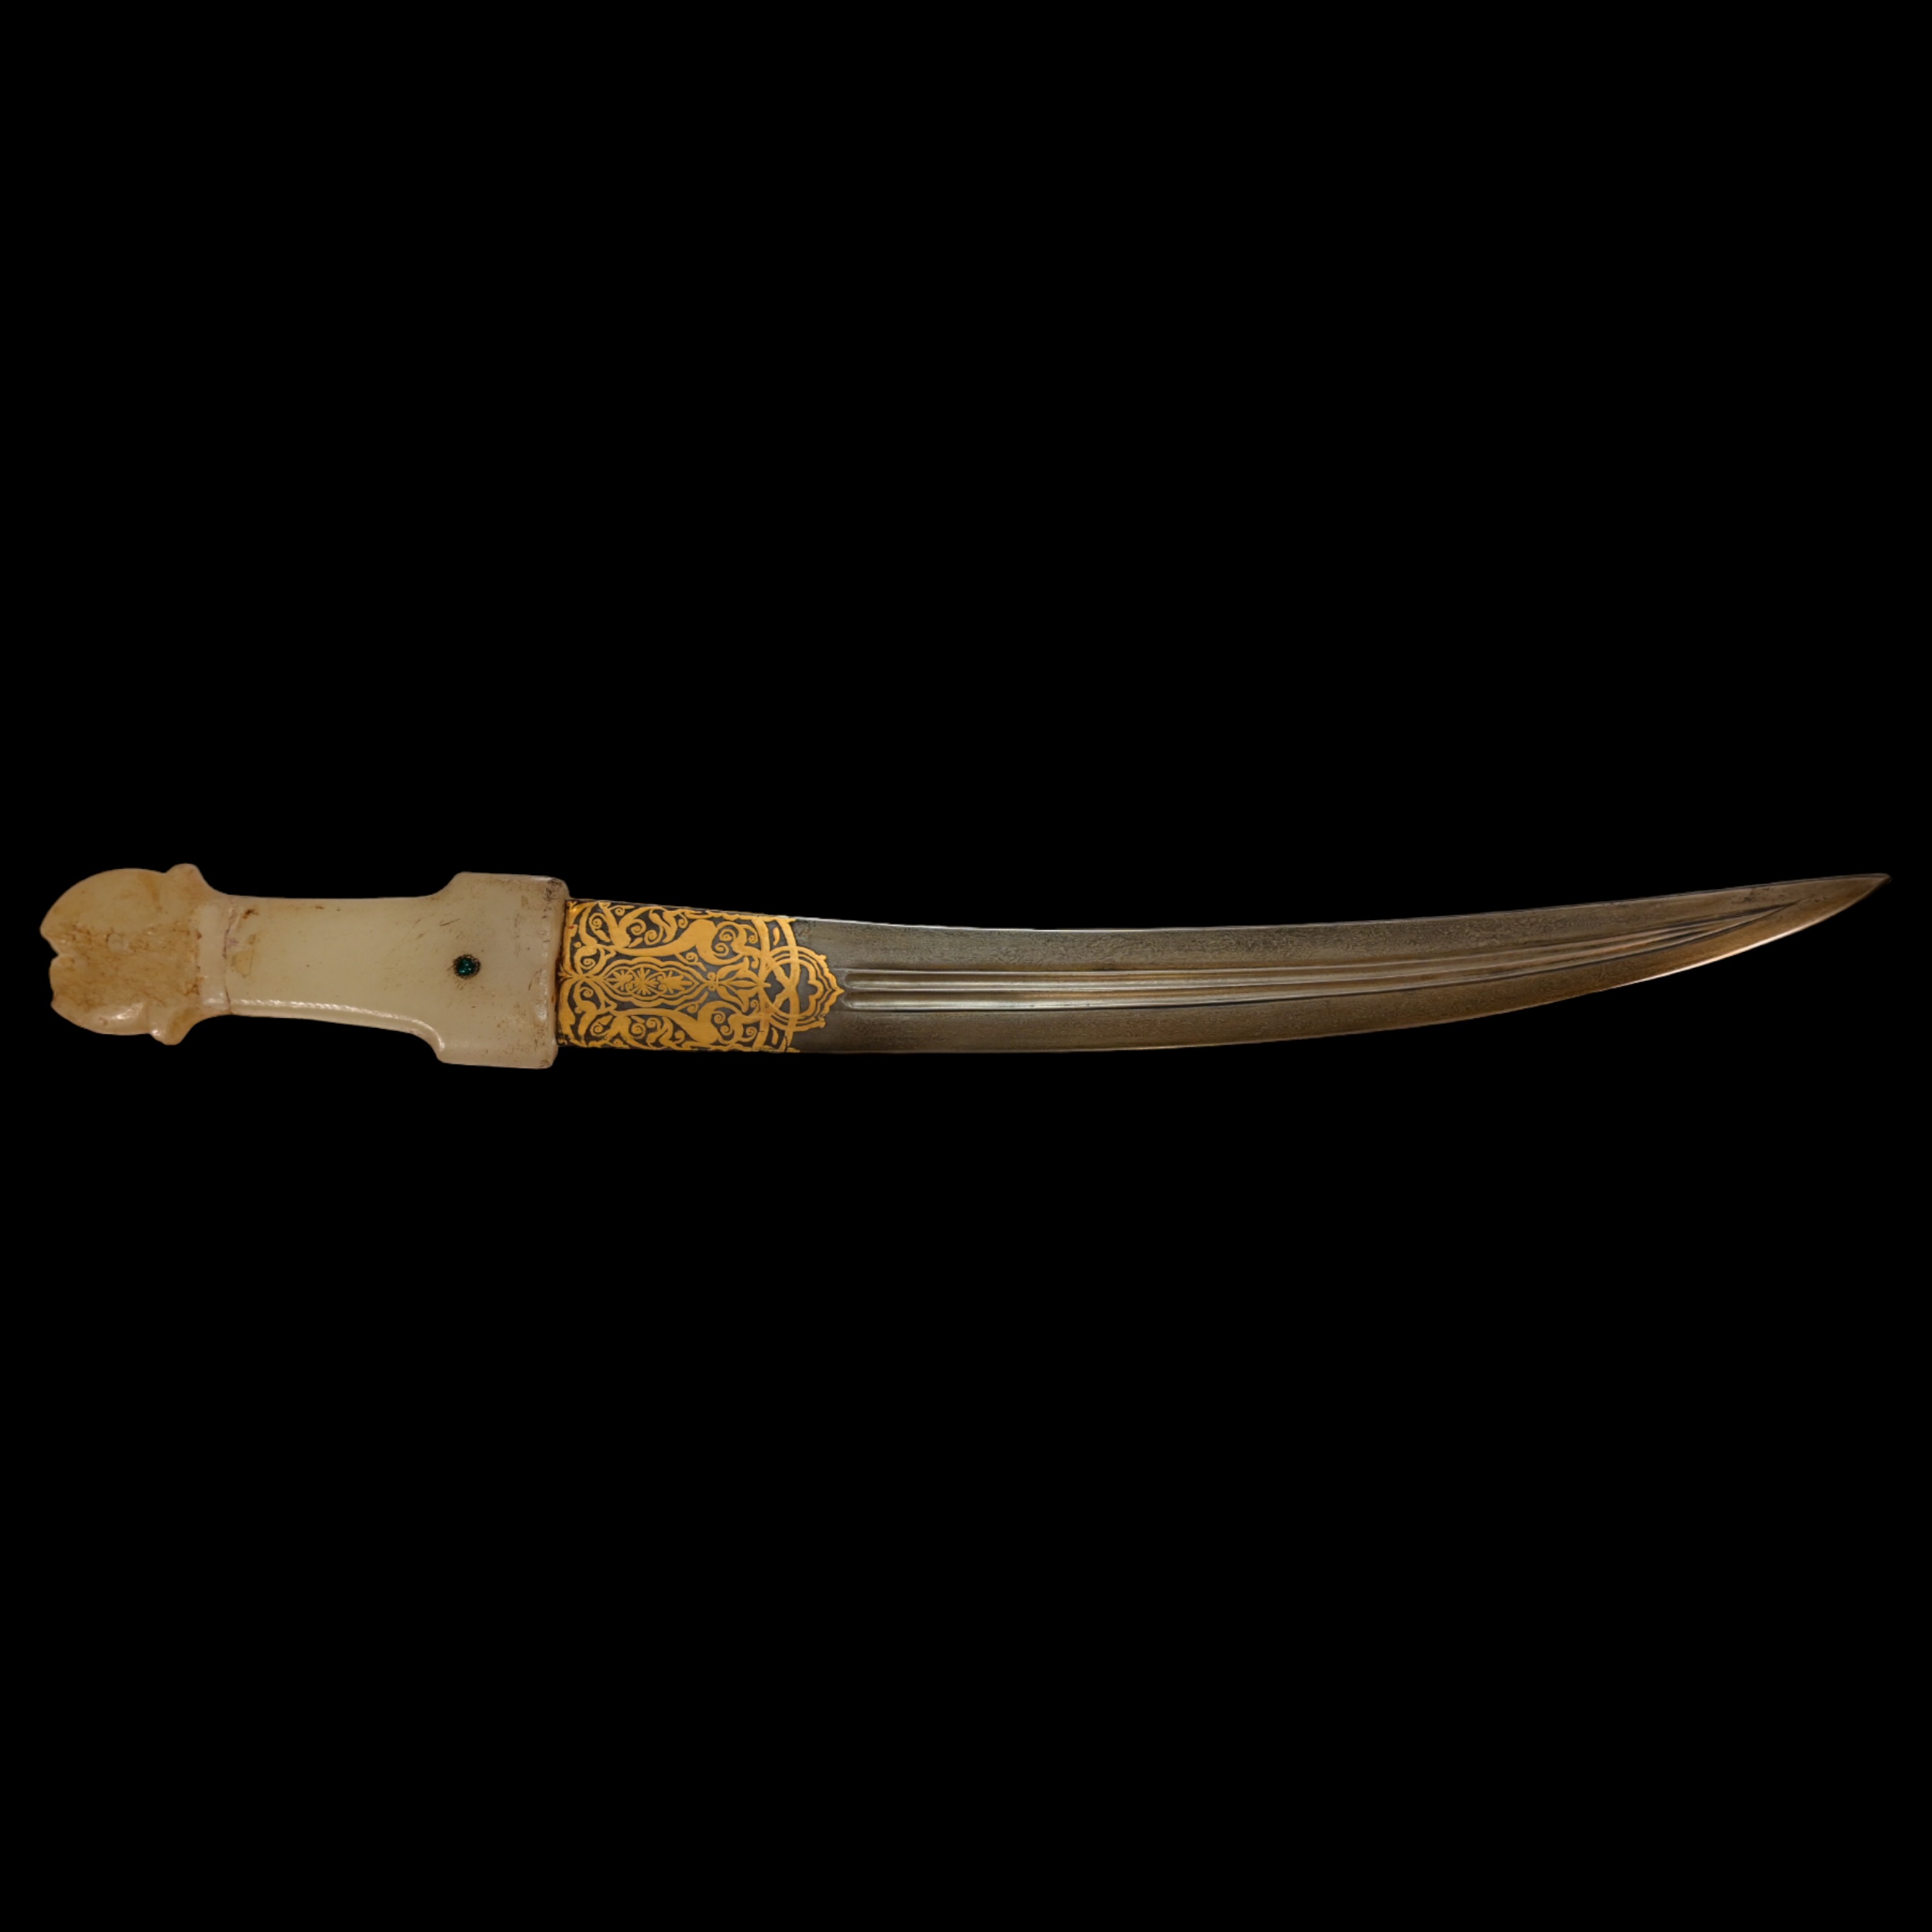 Very rare Dagger with jade handle, Wootz blade, precious stones and gold, Ottoman Empire, 18th C. - Image 12 of 19